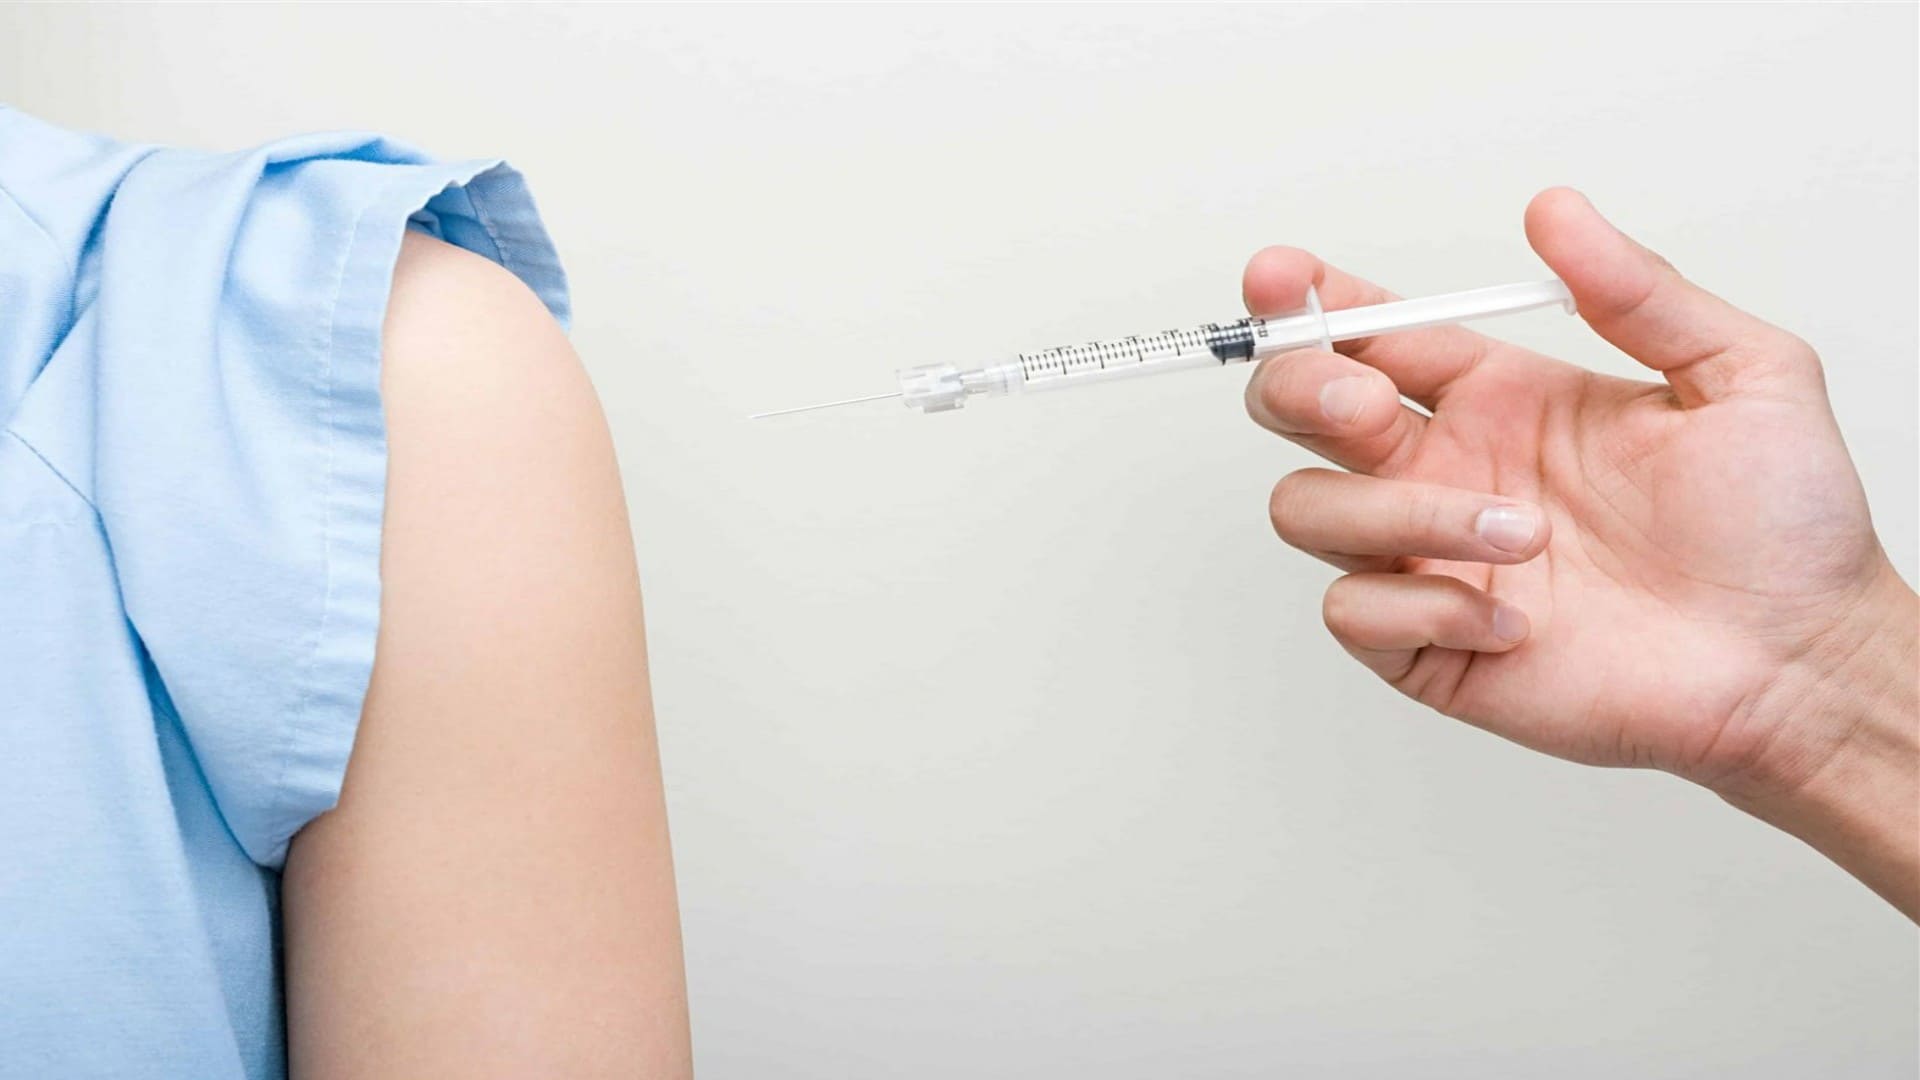 contraceptive injection